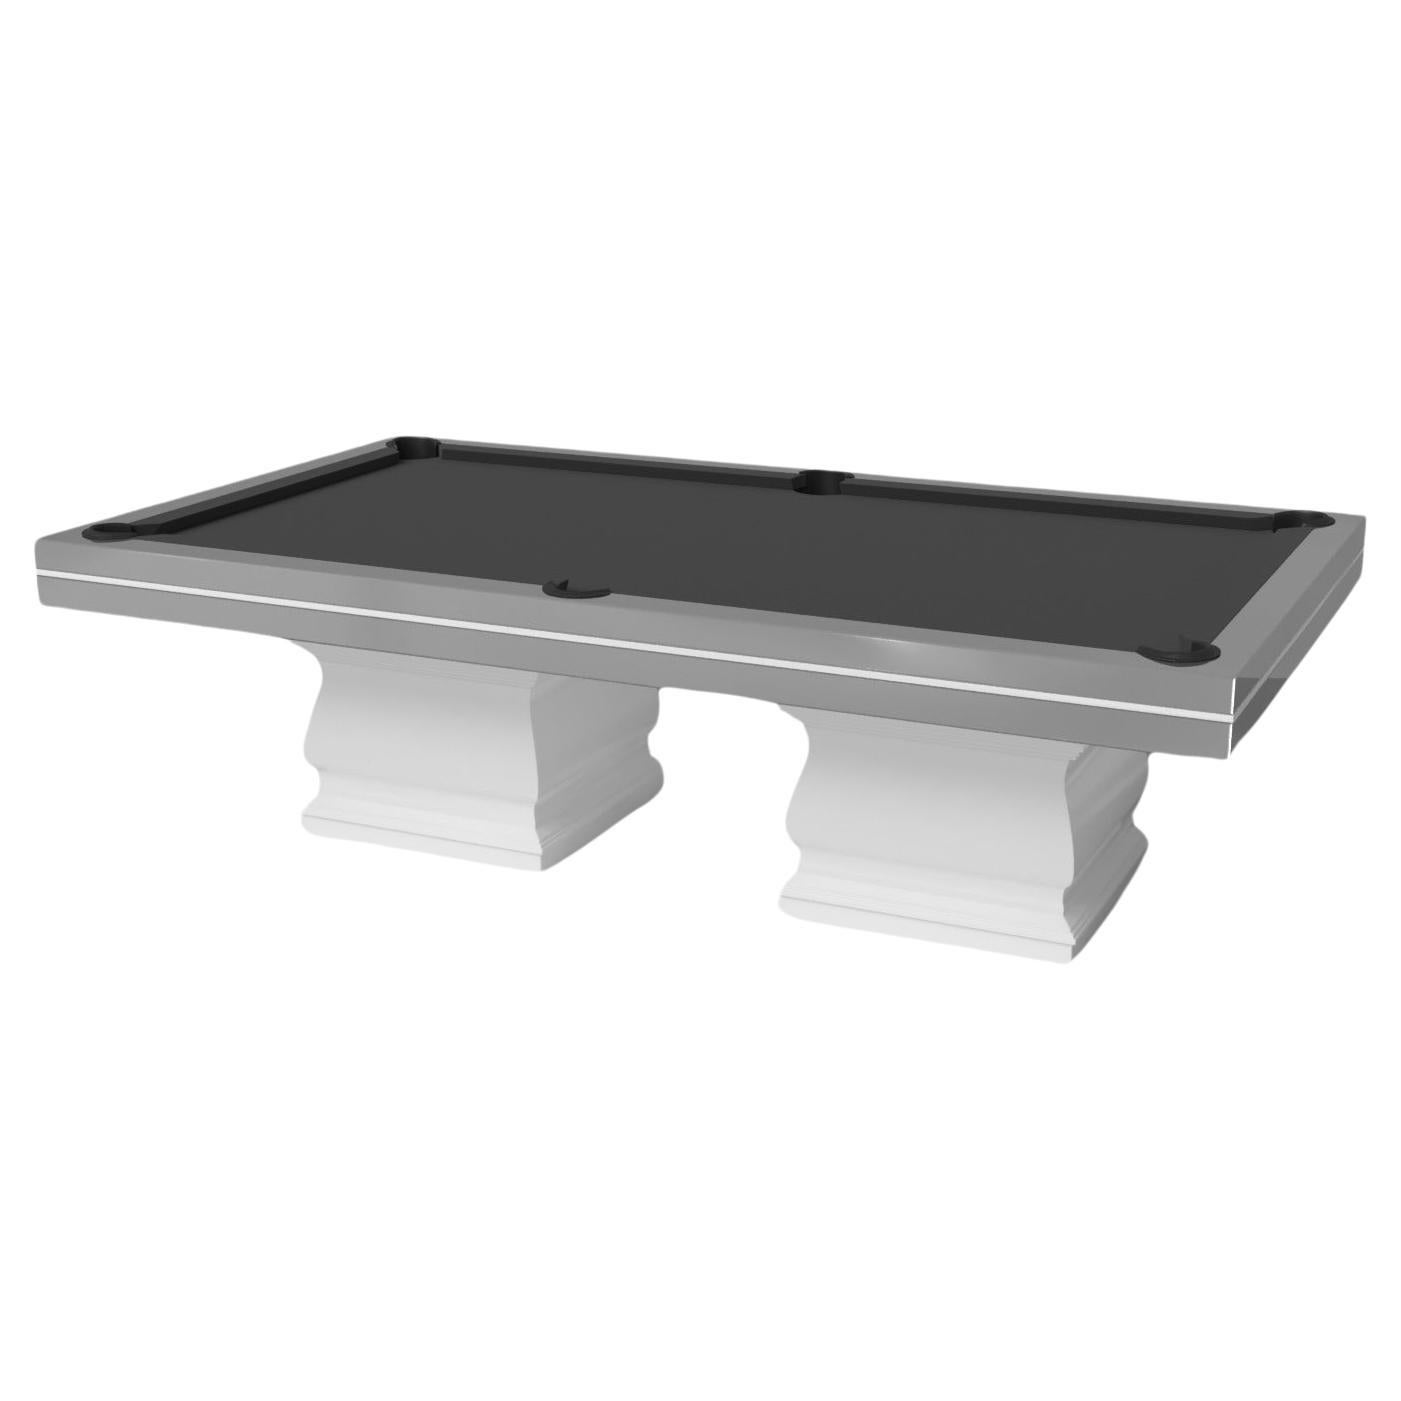 Elevate Customs Baluster Pool Table / Stainless Steel Metal in 9' - Made in USA